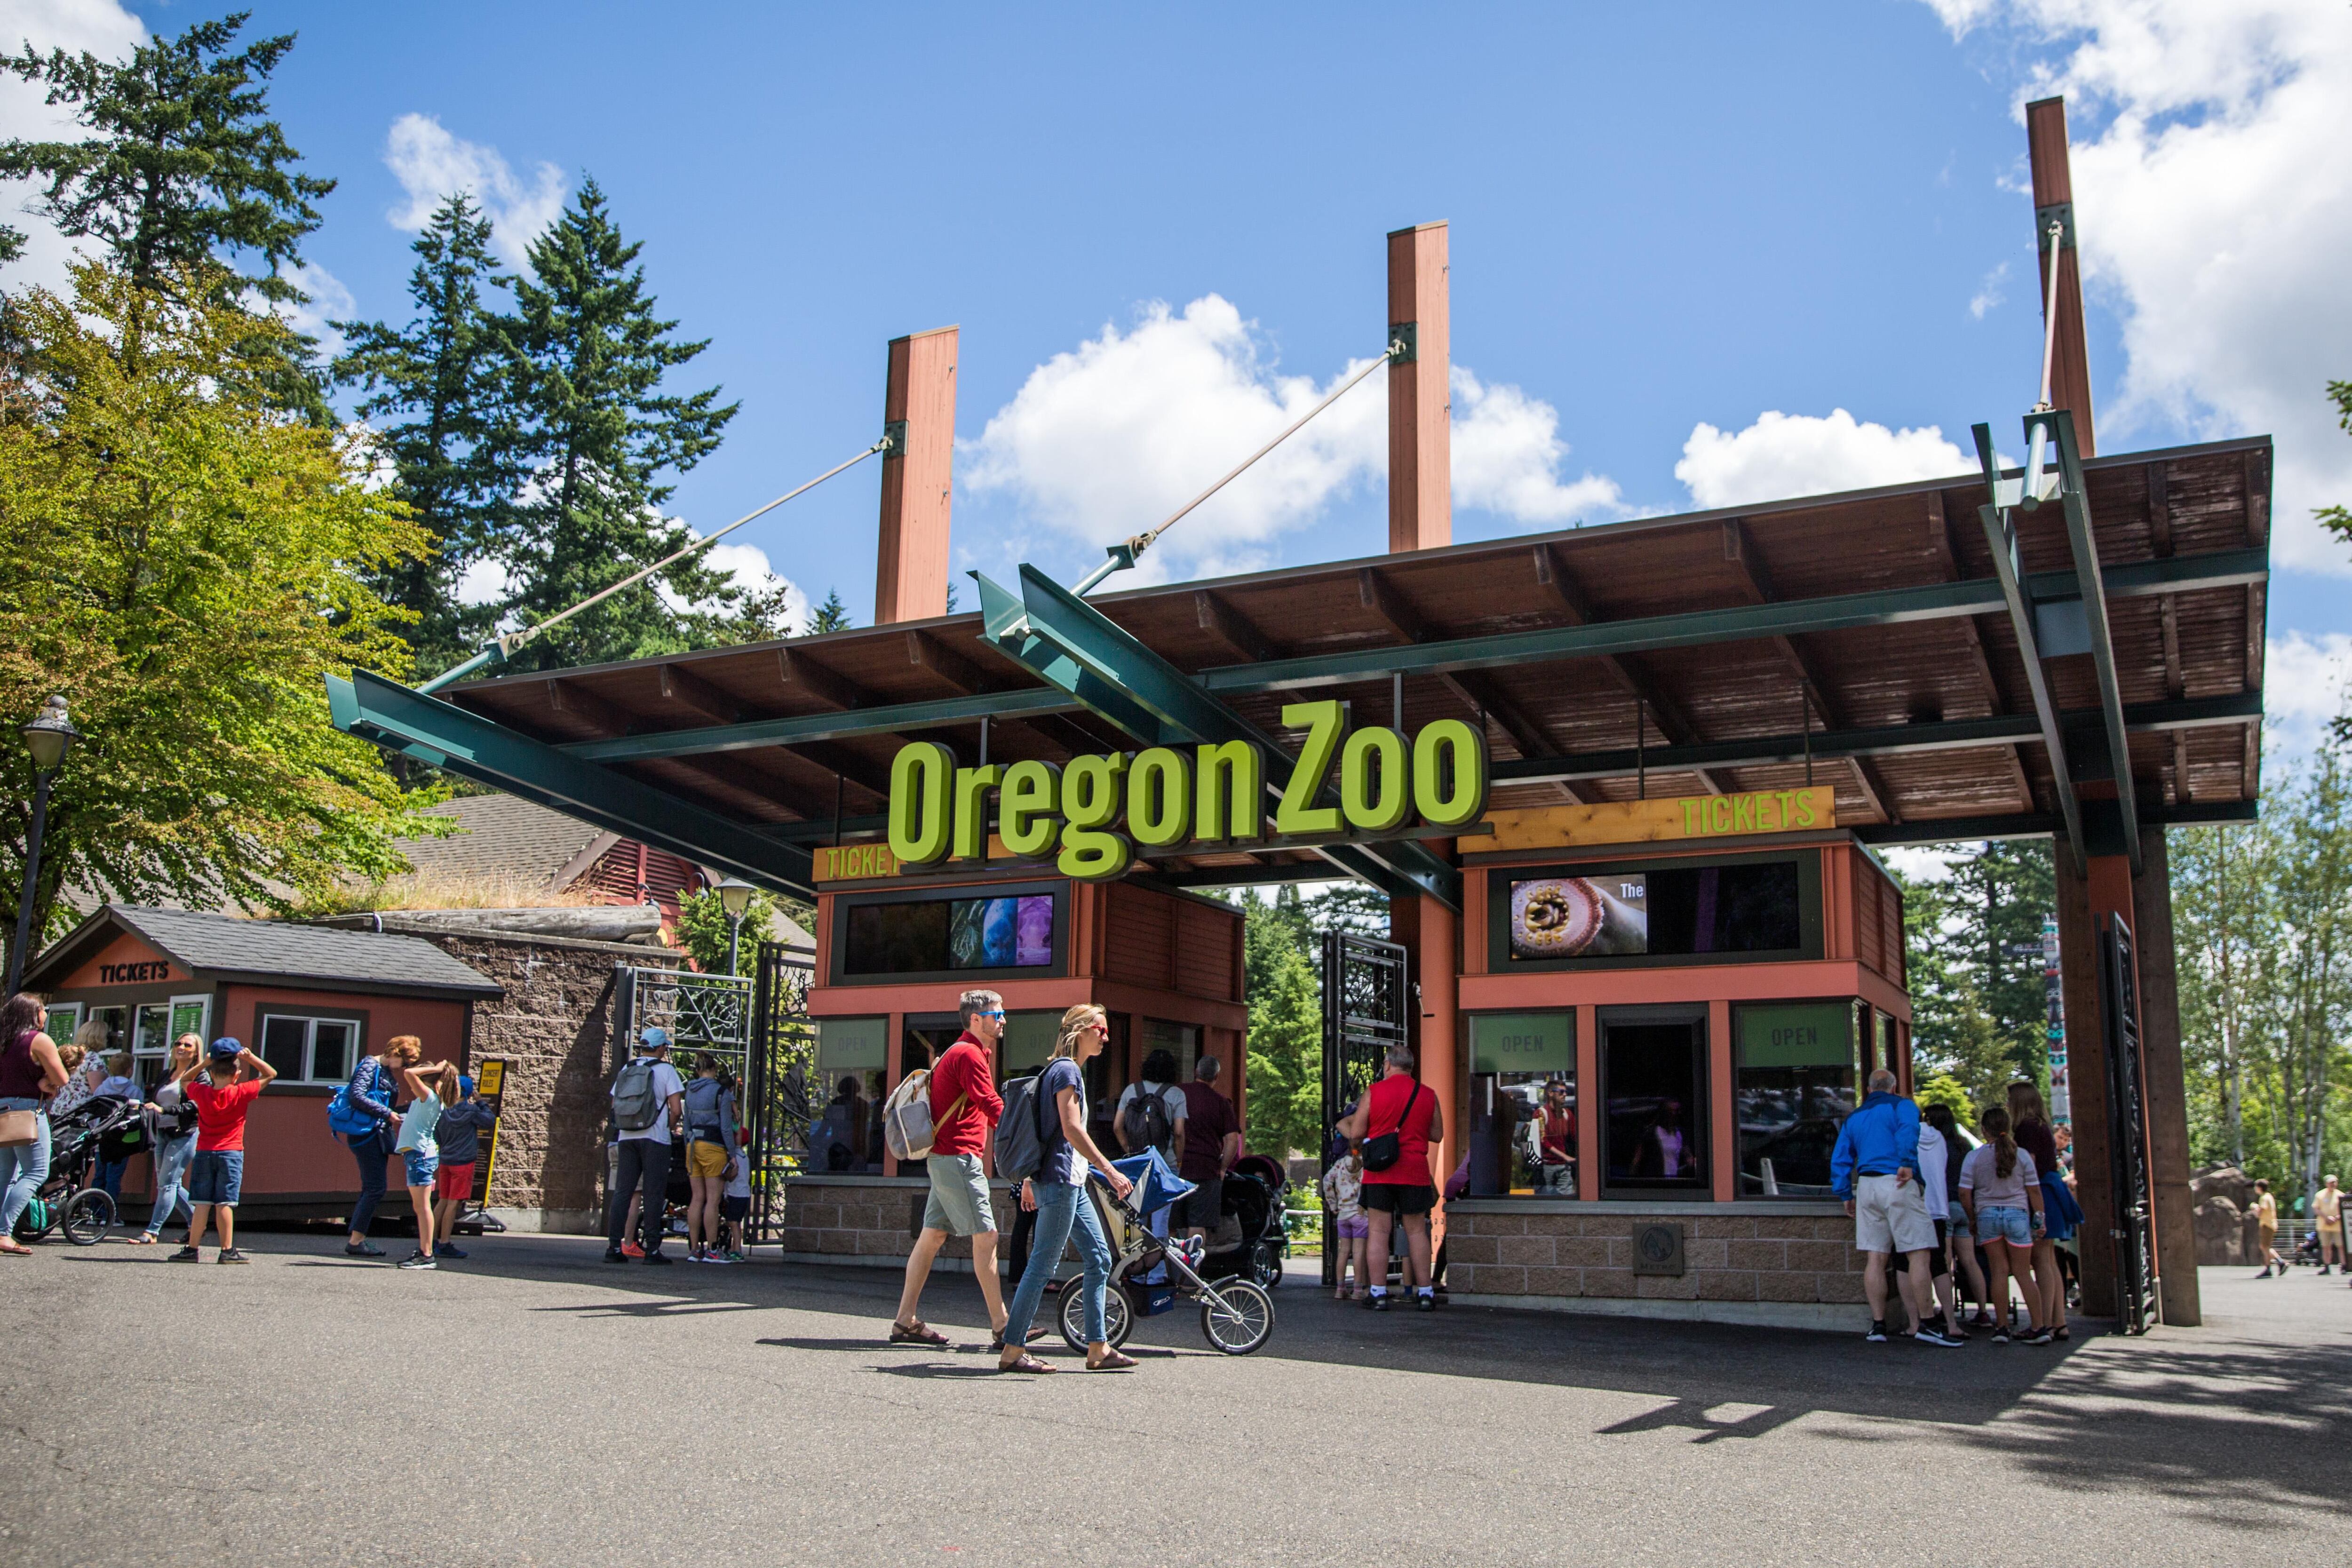 FILE - People line up to enter the Oregon Zoo on June 28, 2019, in Portland, Ore. The zoo, located in Washington Park, says it needs funding to upgrade many of its older buildings.